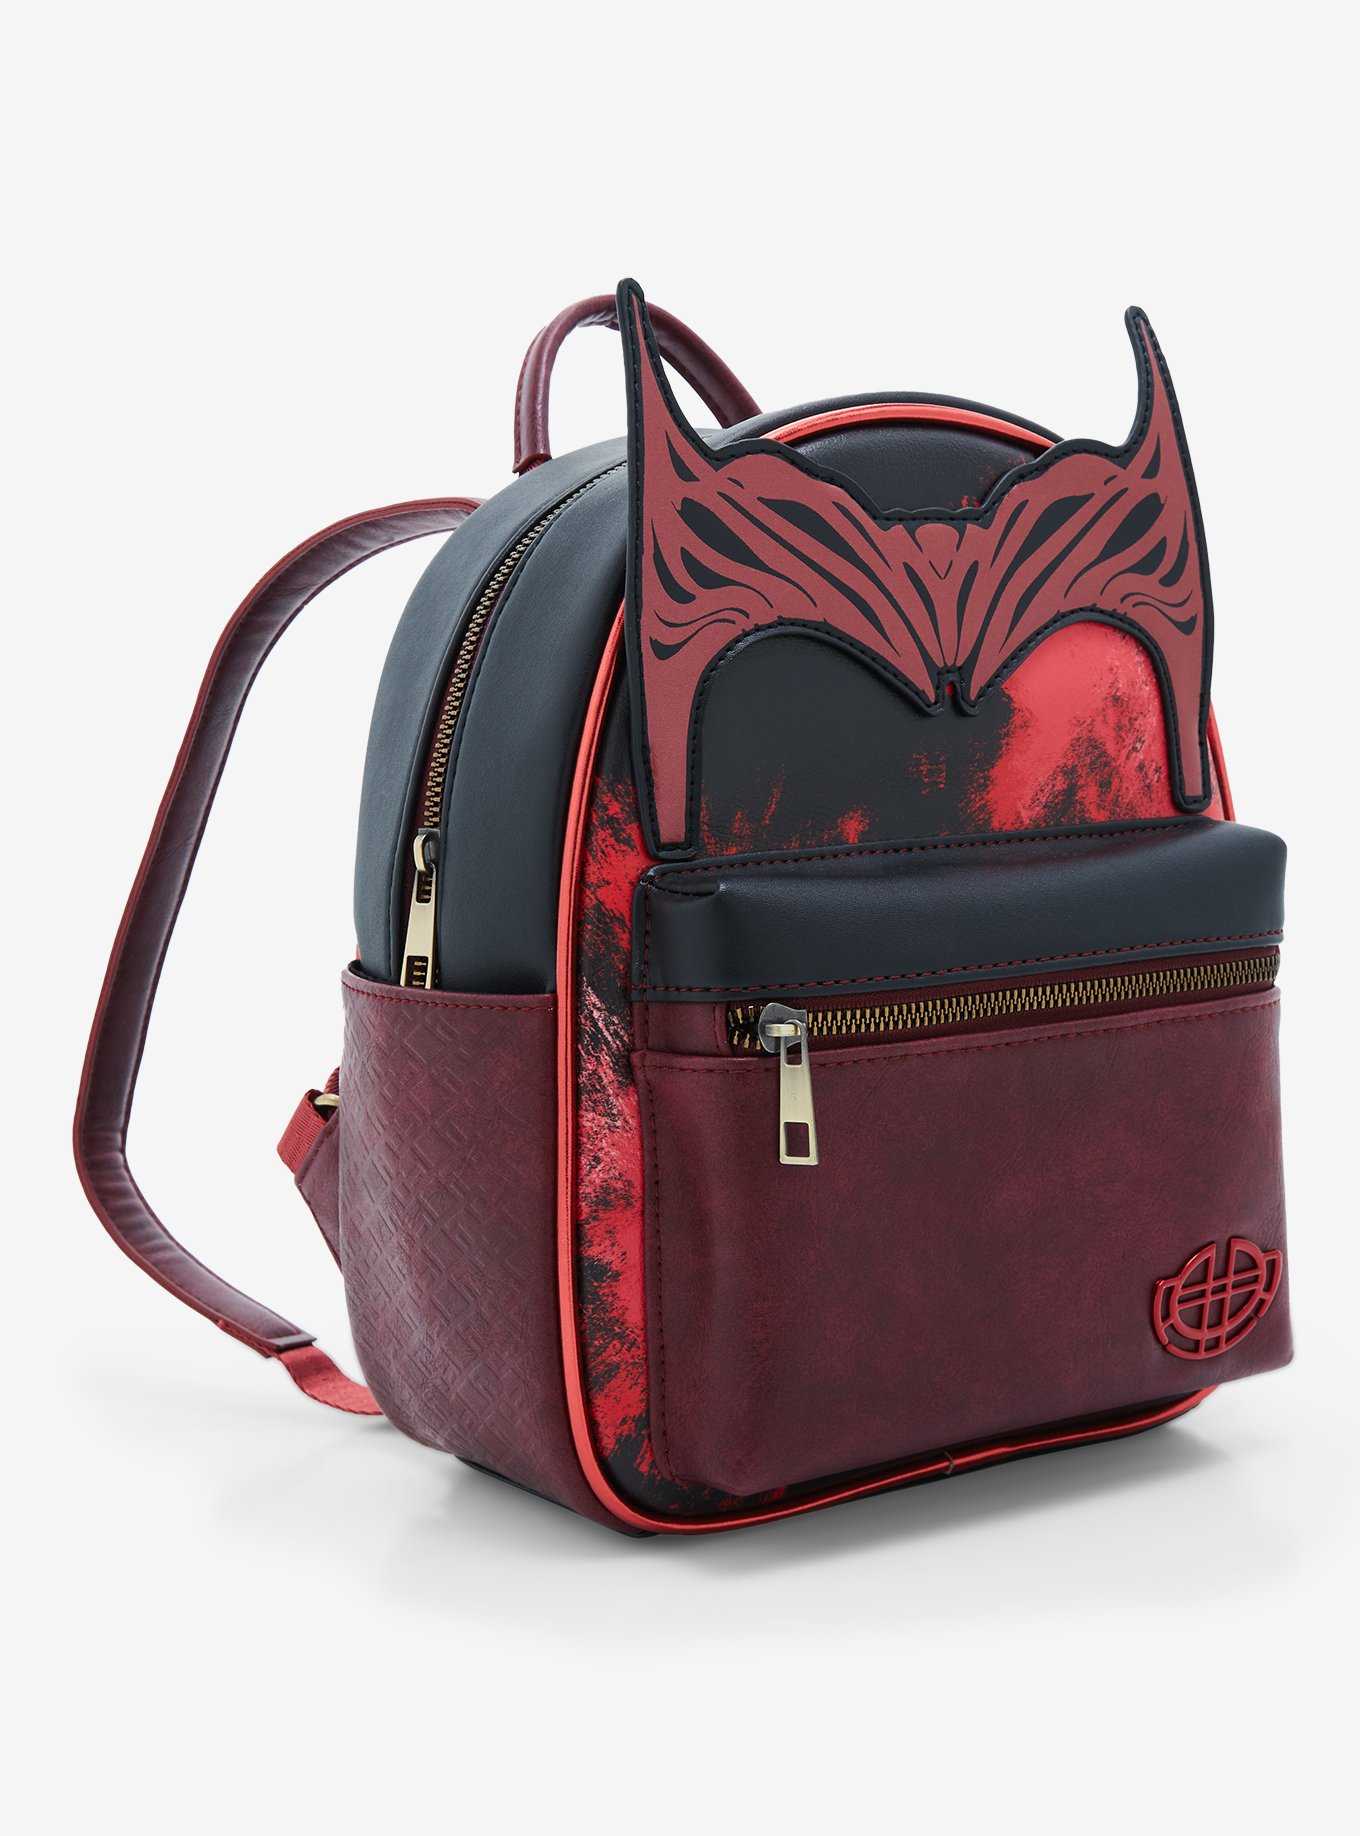 Marvel Doctor Strange In The Multiverse Of Madness Scarlet Witch Mini Backpack, , hi-res